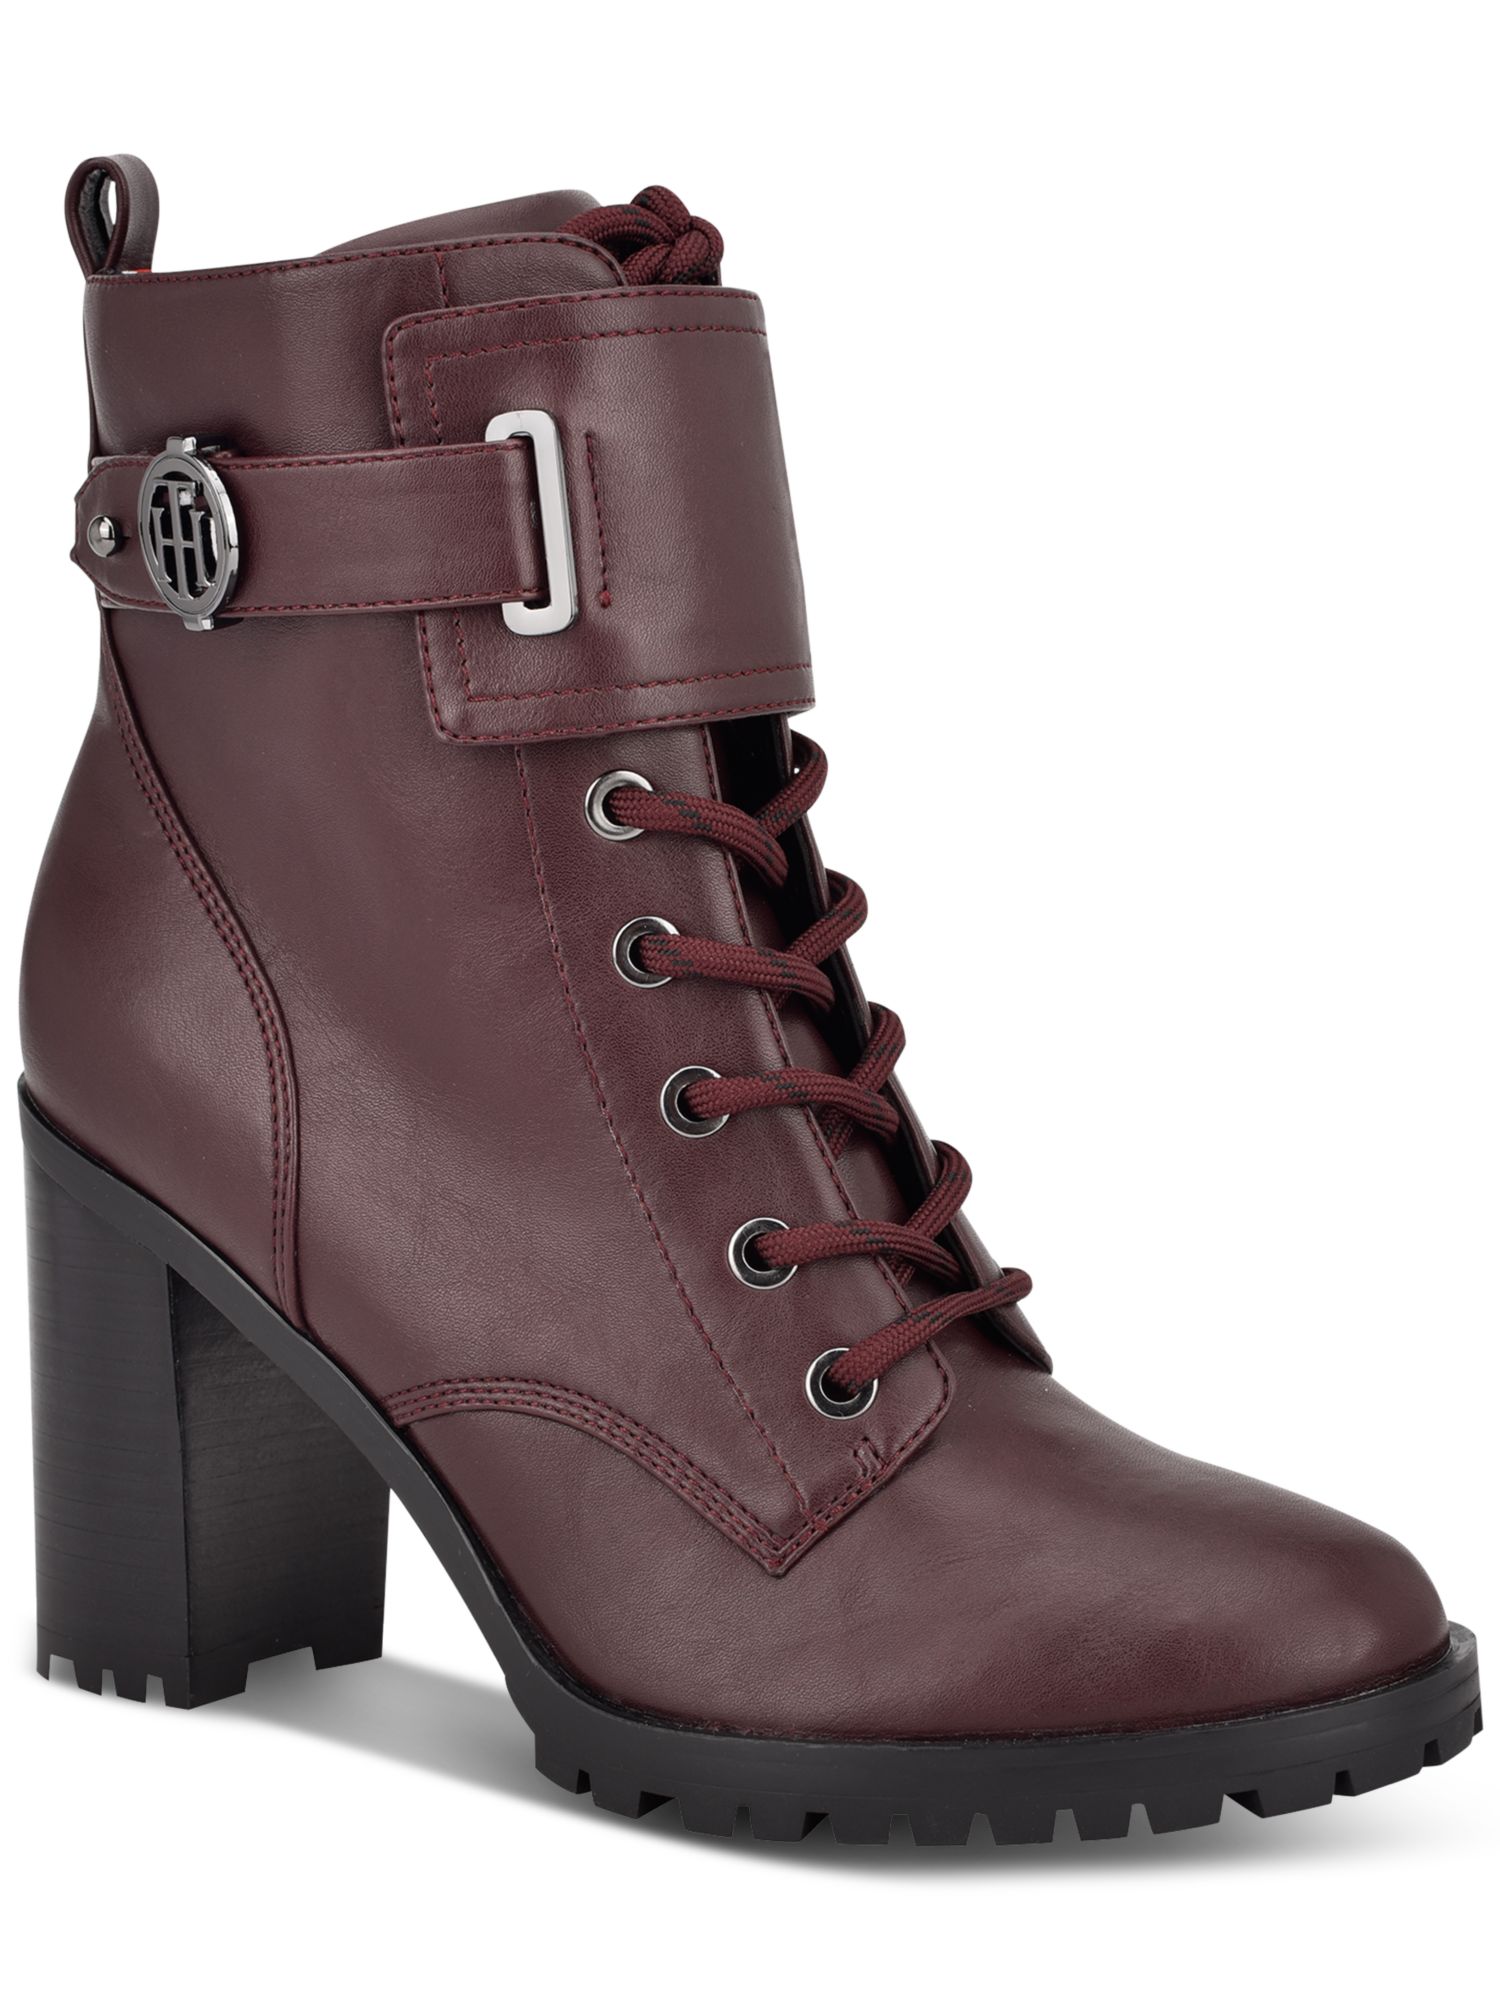 TOMMY HILFIGER Womens Maroon Lug Sole Buckle Accent Round Toe Block Heel Lace-Up Booties 5.5